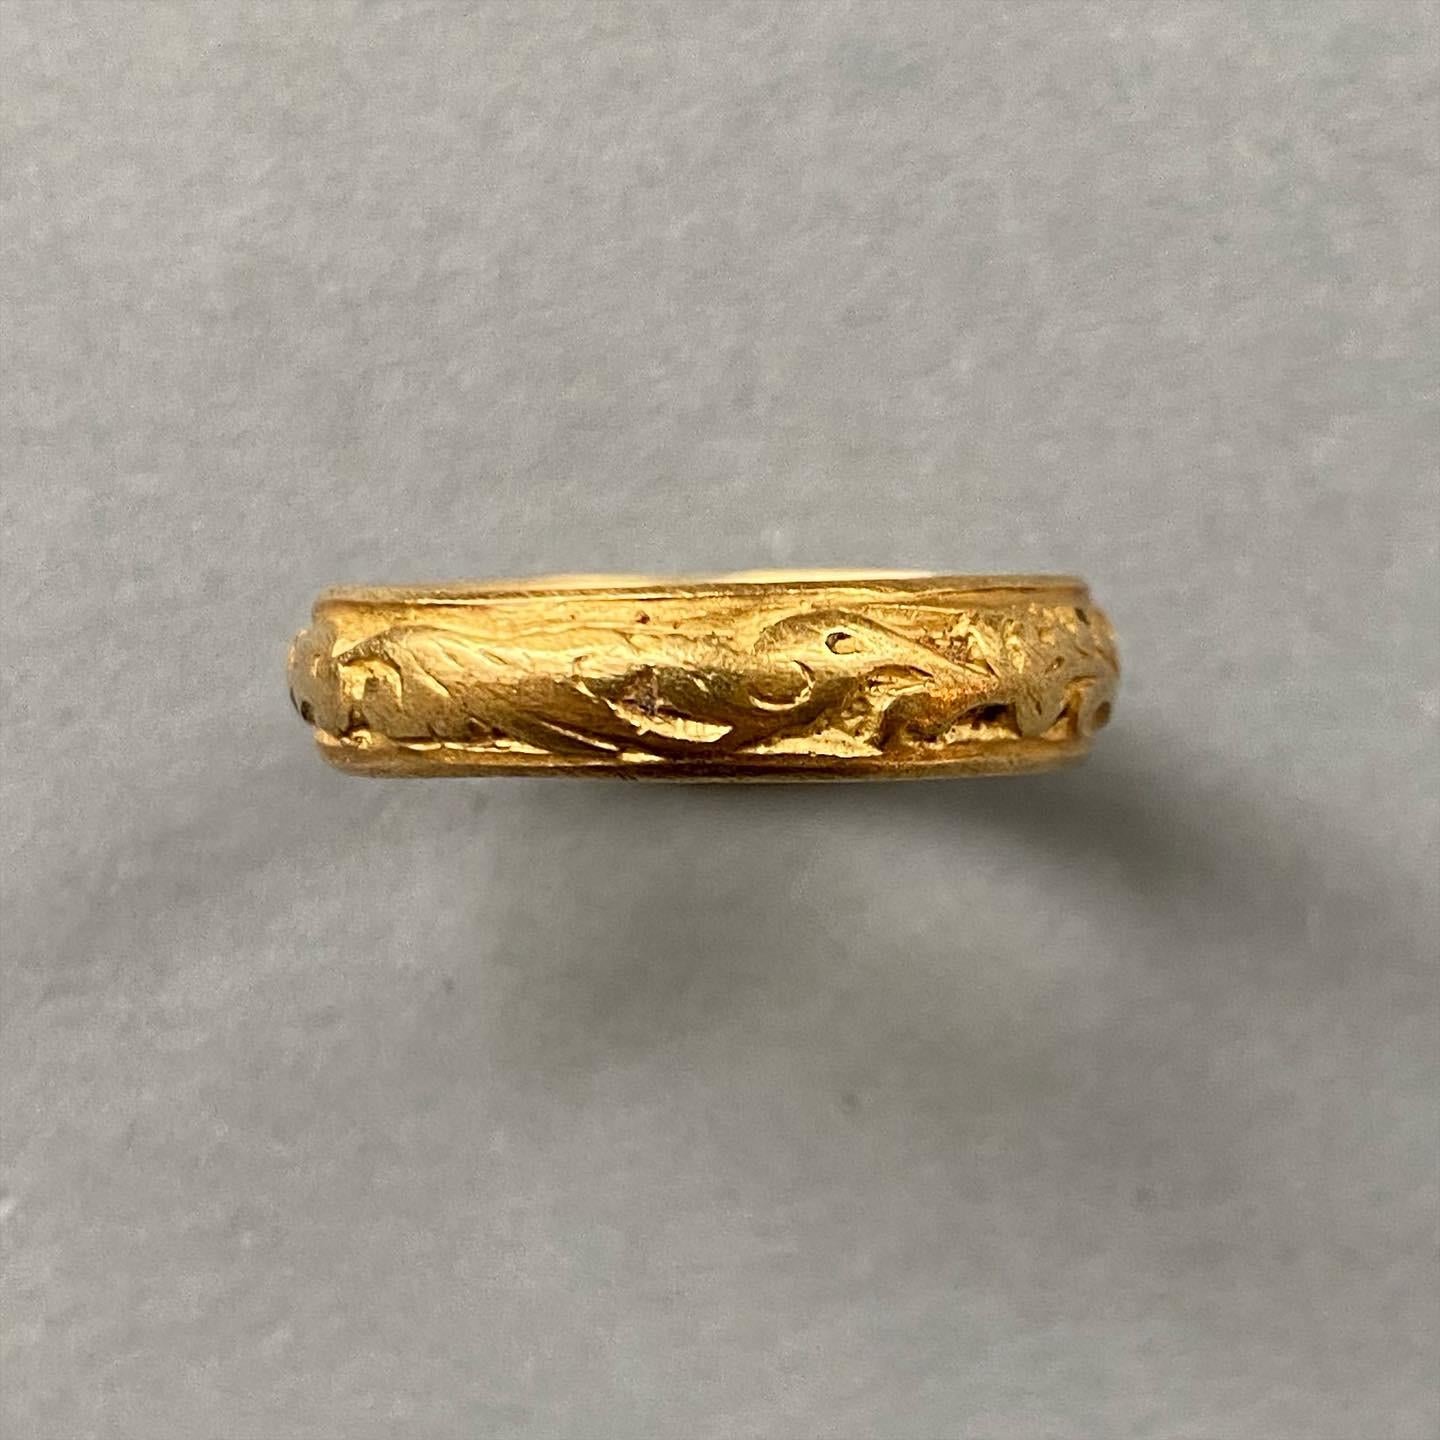 A rare early gold ring fully decorated with foliate ornaments and a bird!  lacking its original champlevé enamel except for a few tiny black spots, Western European, 1st quarter of the 17th century. Found in the Netherlands and registered with